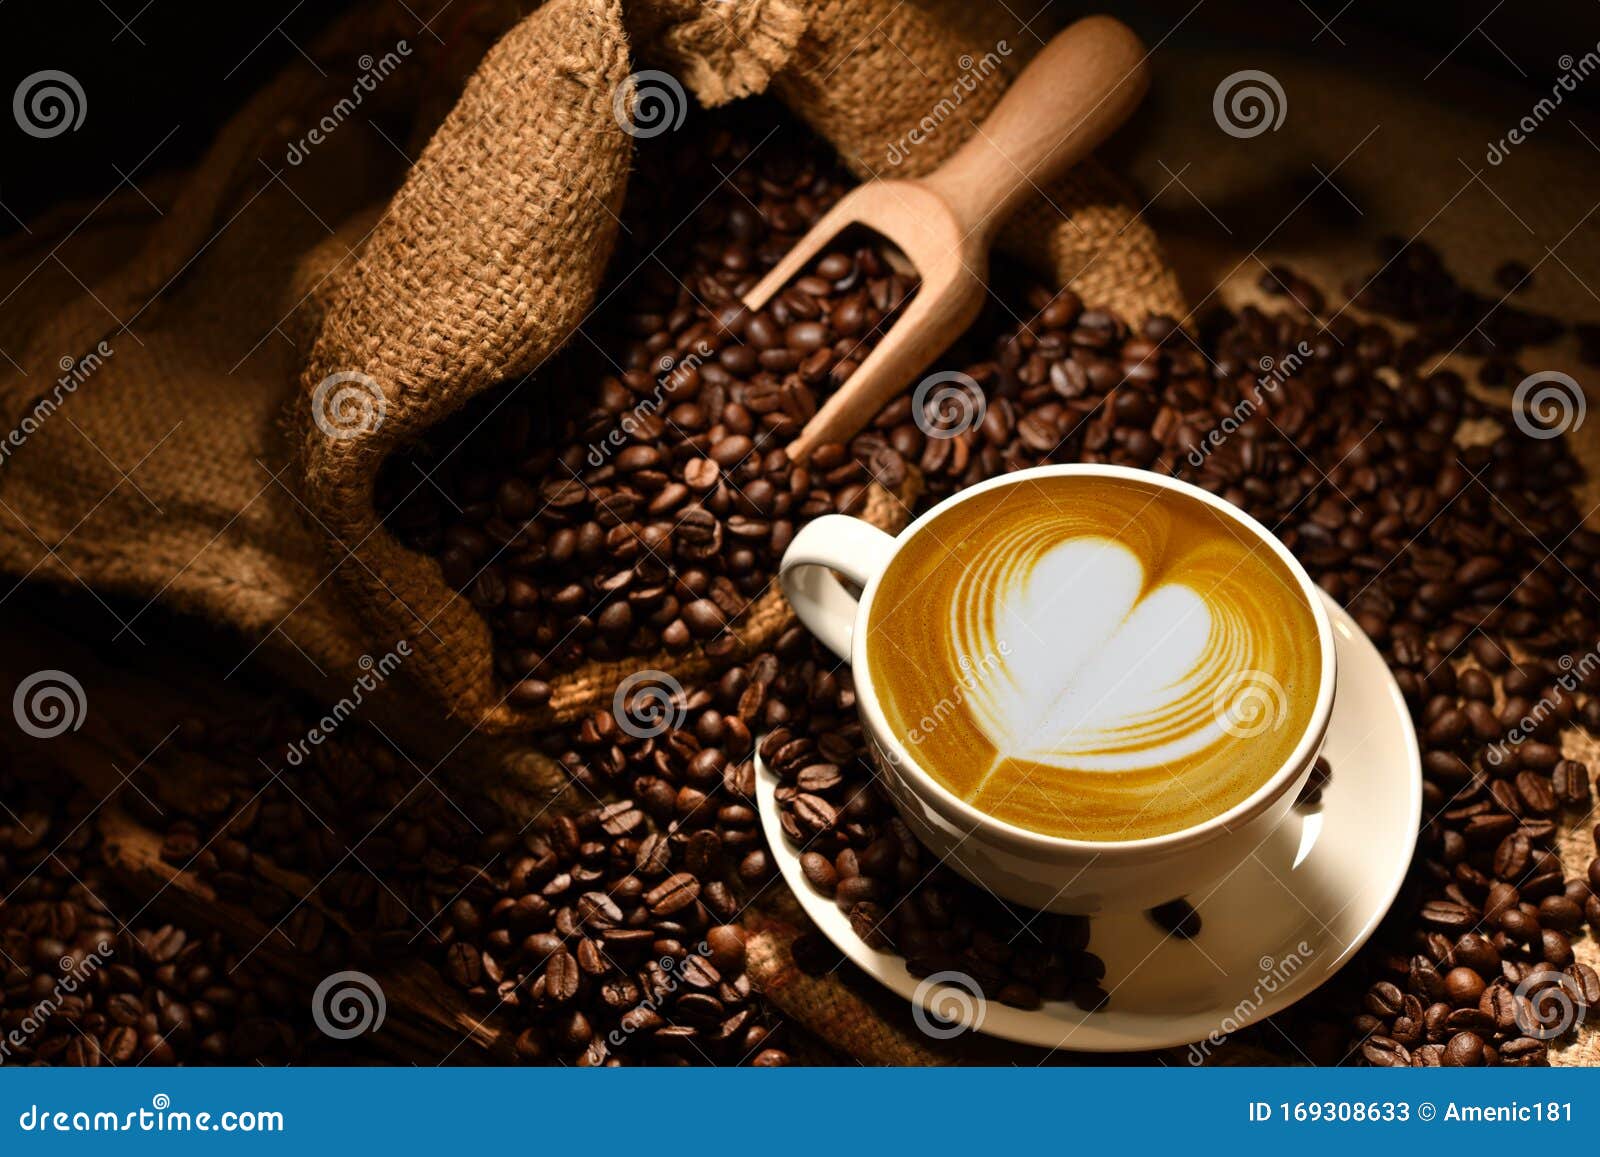 Latte art coffee on wooden table, cozy image for marketing